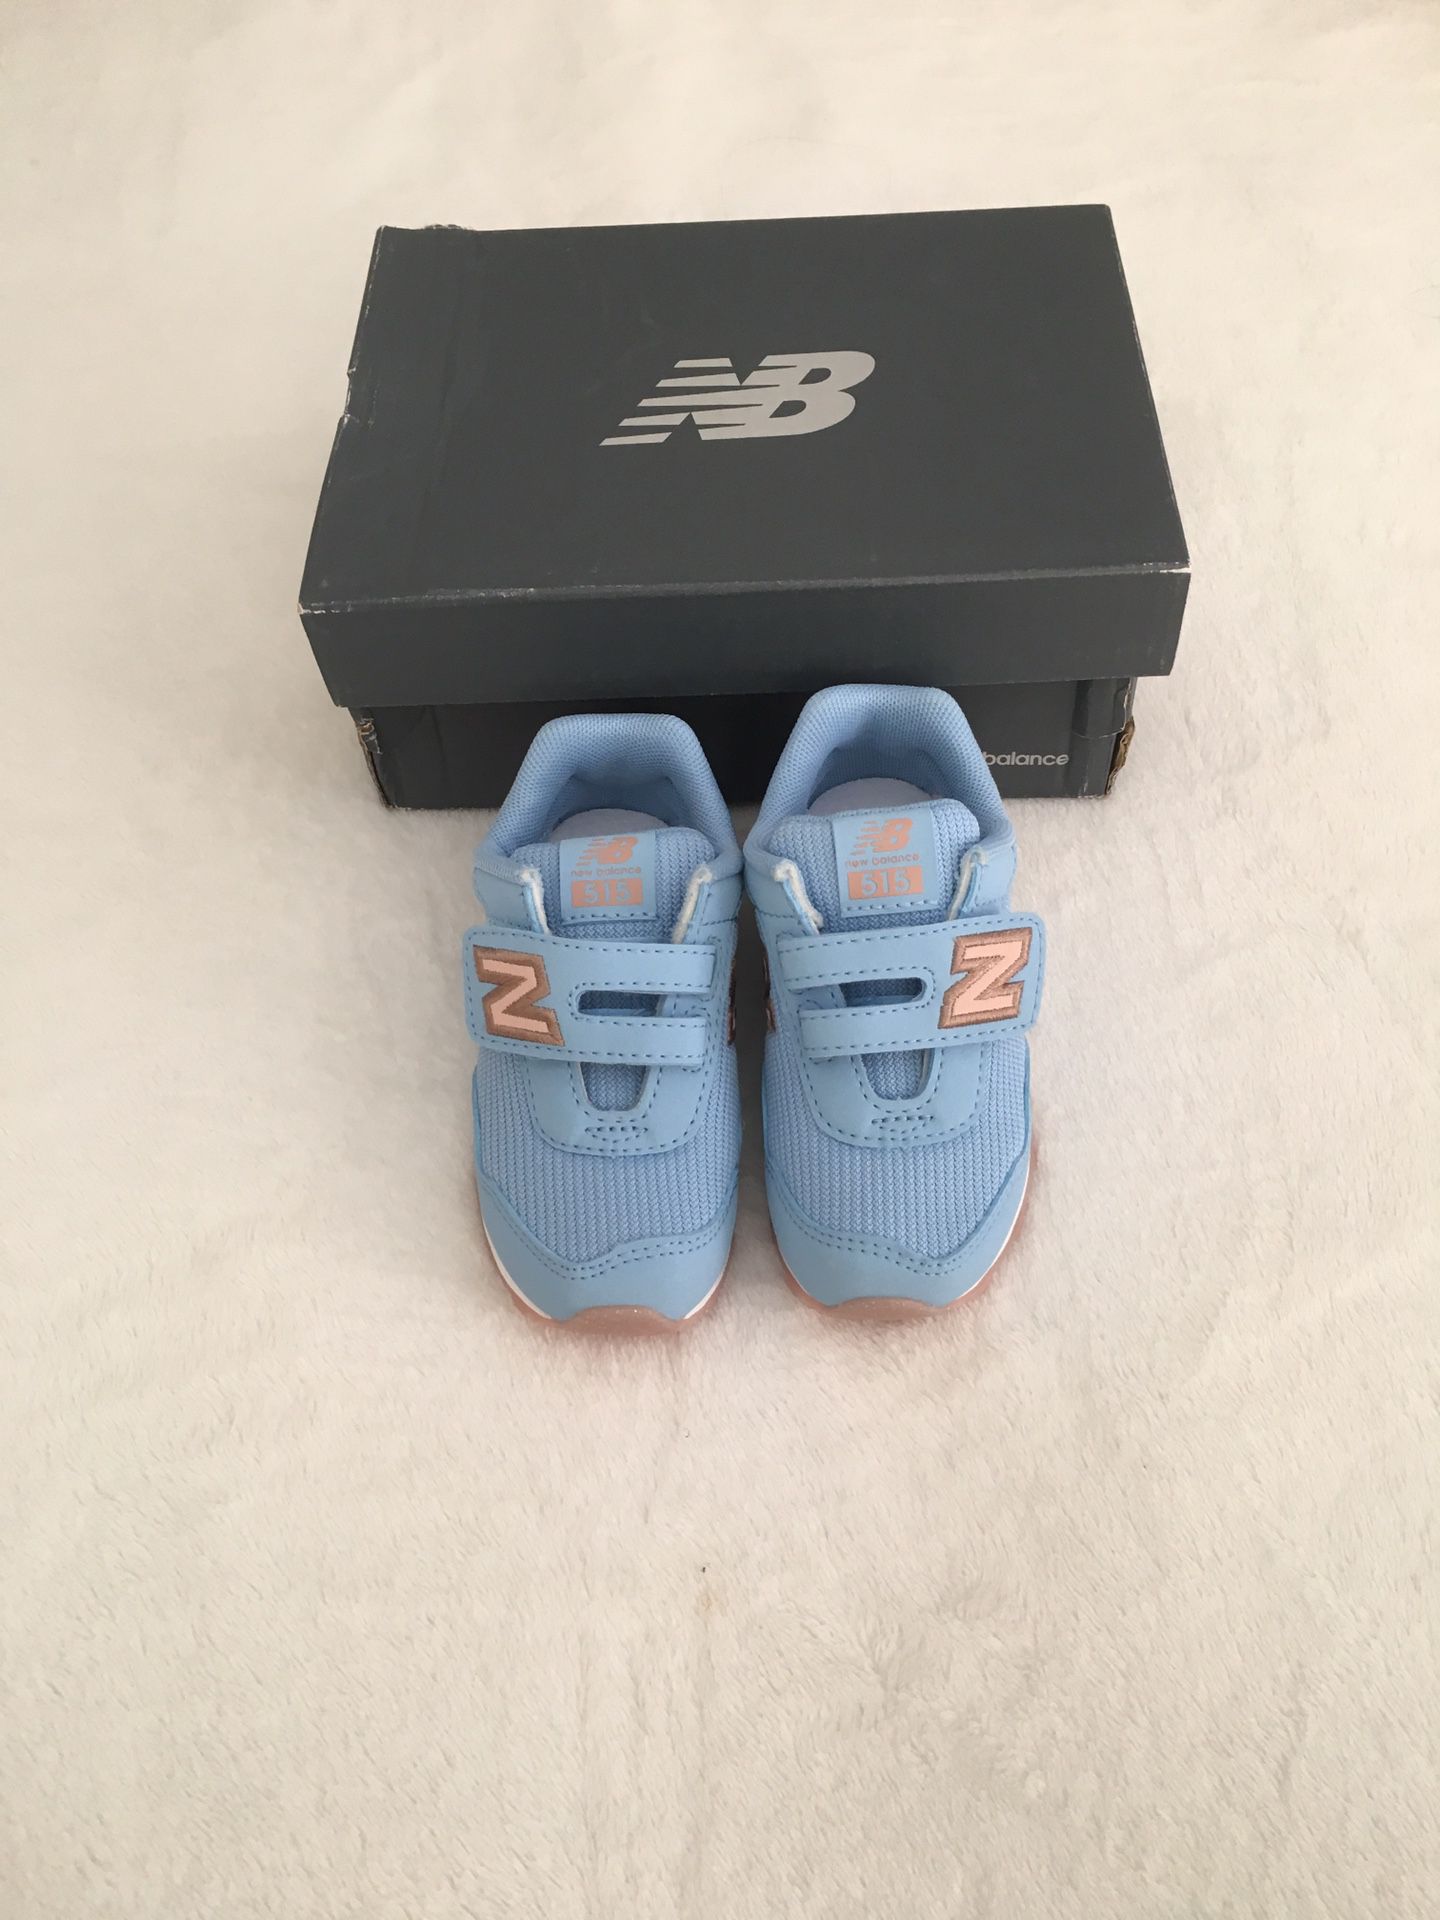 Toddler sneakers in size 7